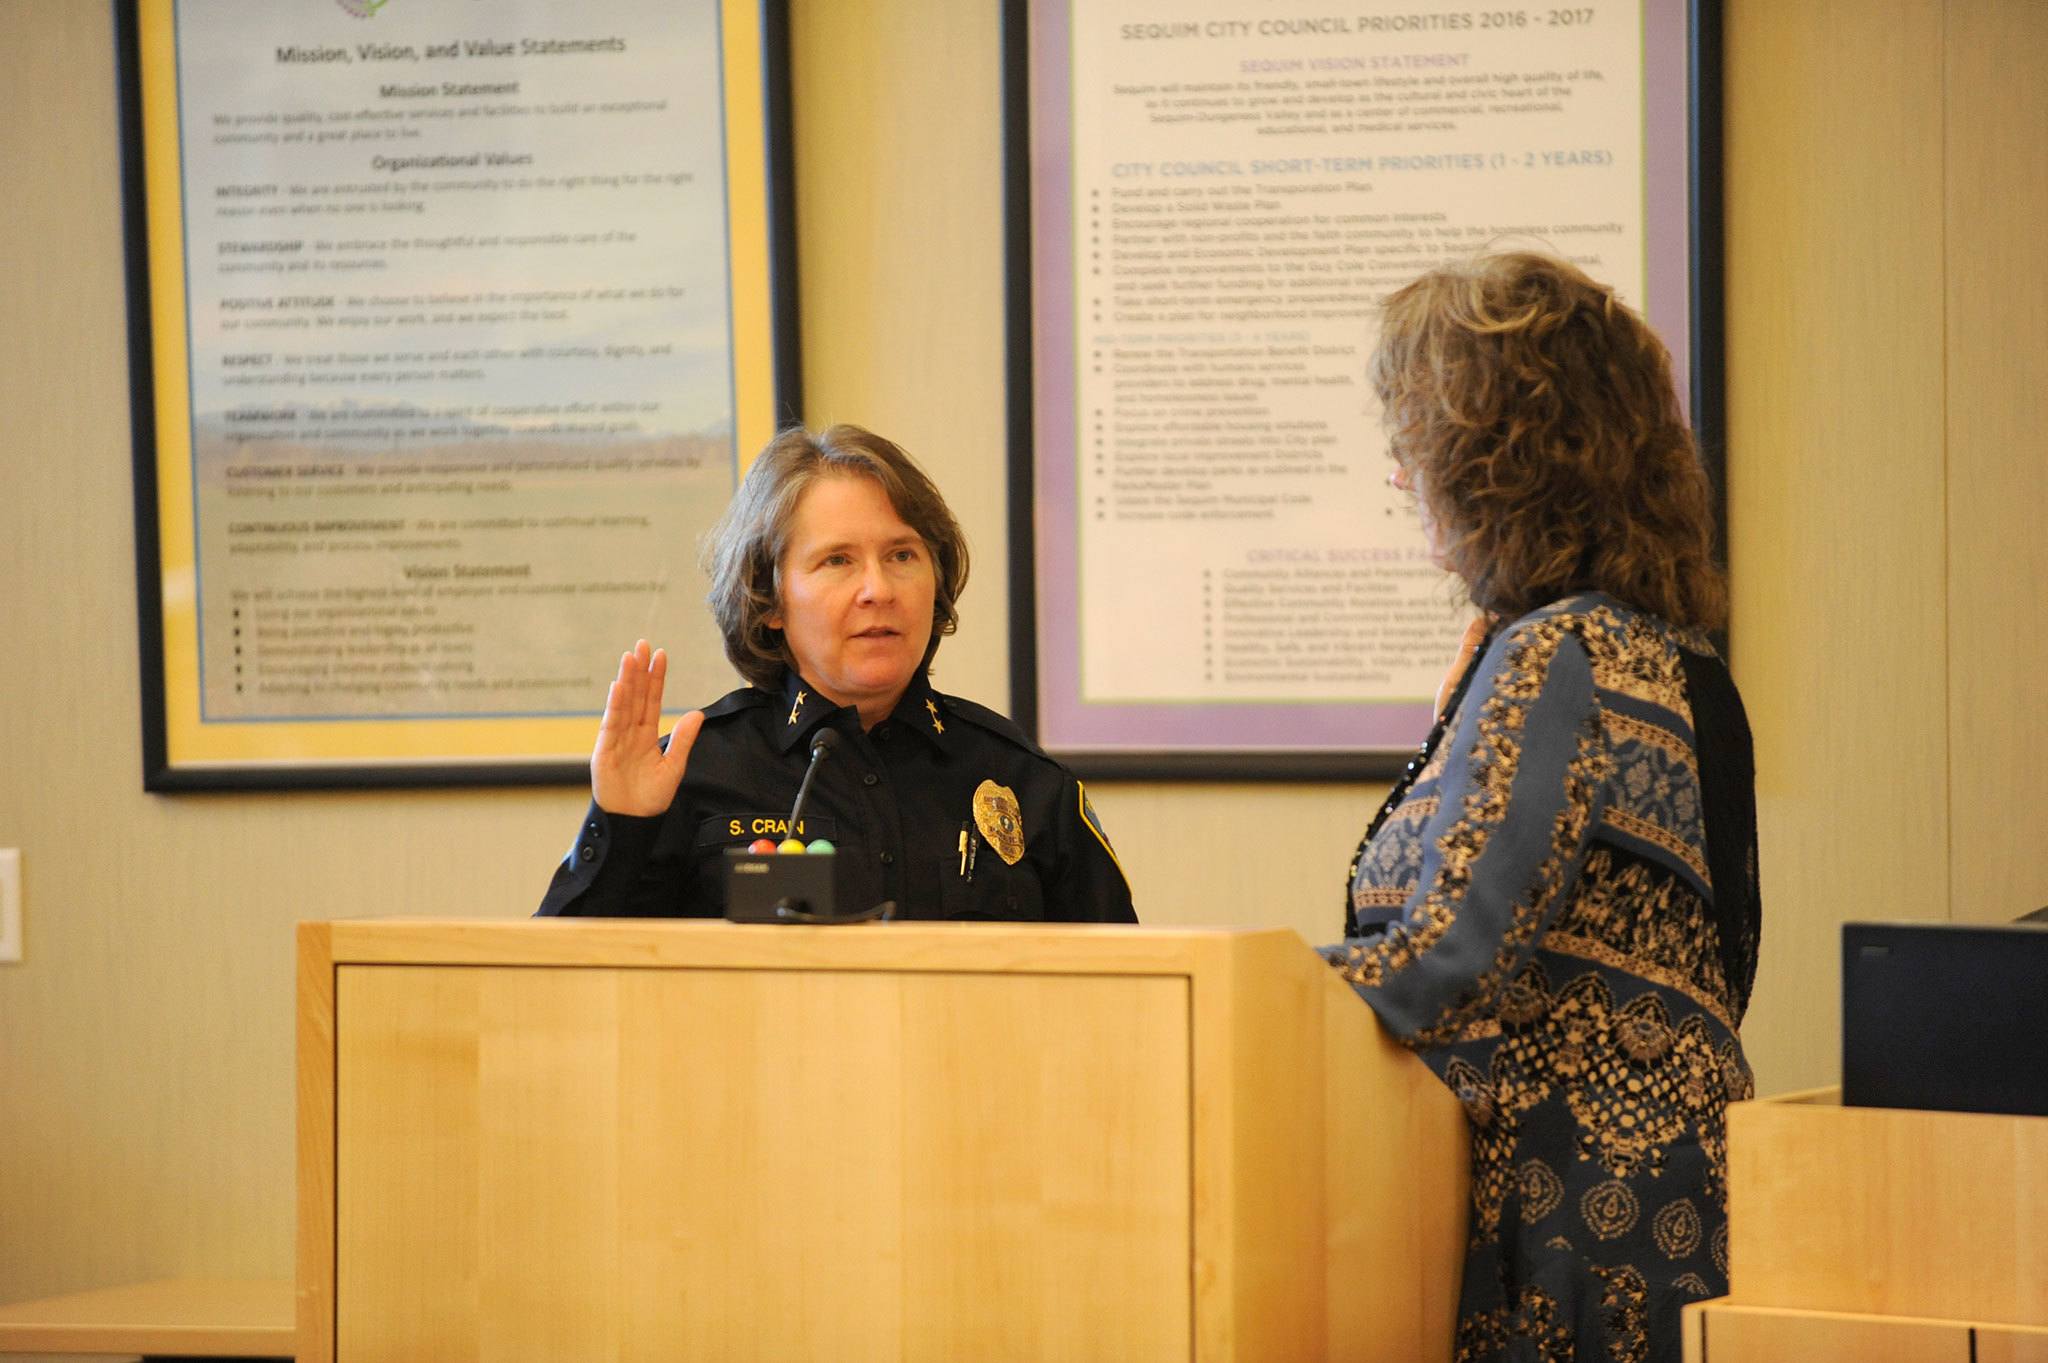 Matthew Nash/Olympic Peninsula News Group                                Sheri Crain, new police chief for the city of Sequim, takes an oath for the position from Sequim city clerk Karen Kuznek-Reese last Friday in the Sequim City Council’s chambers.